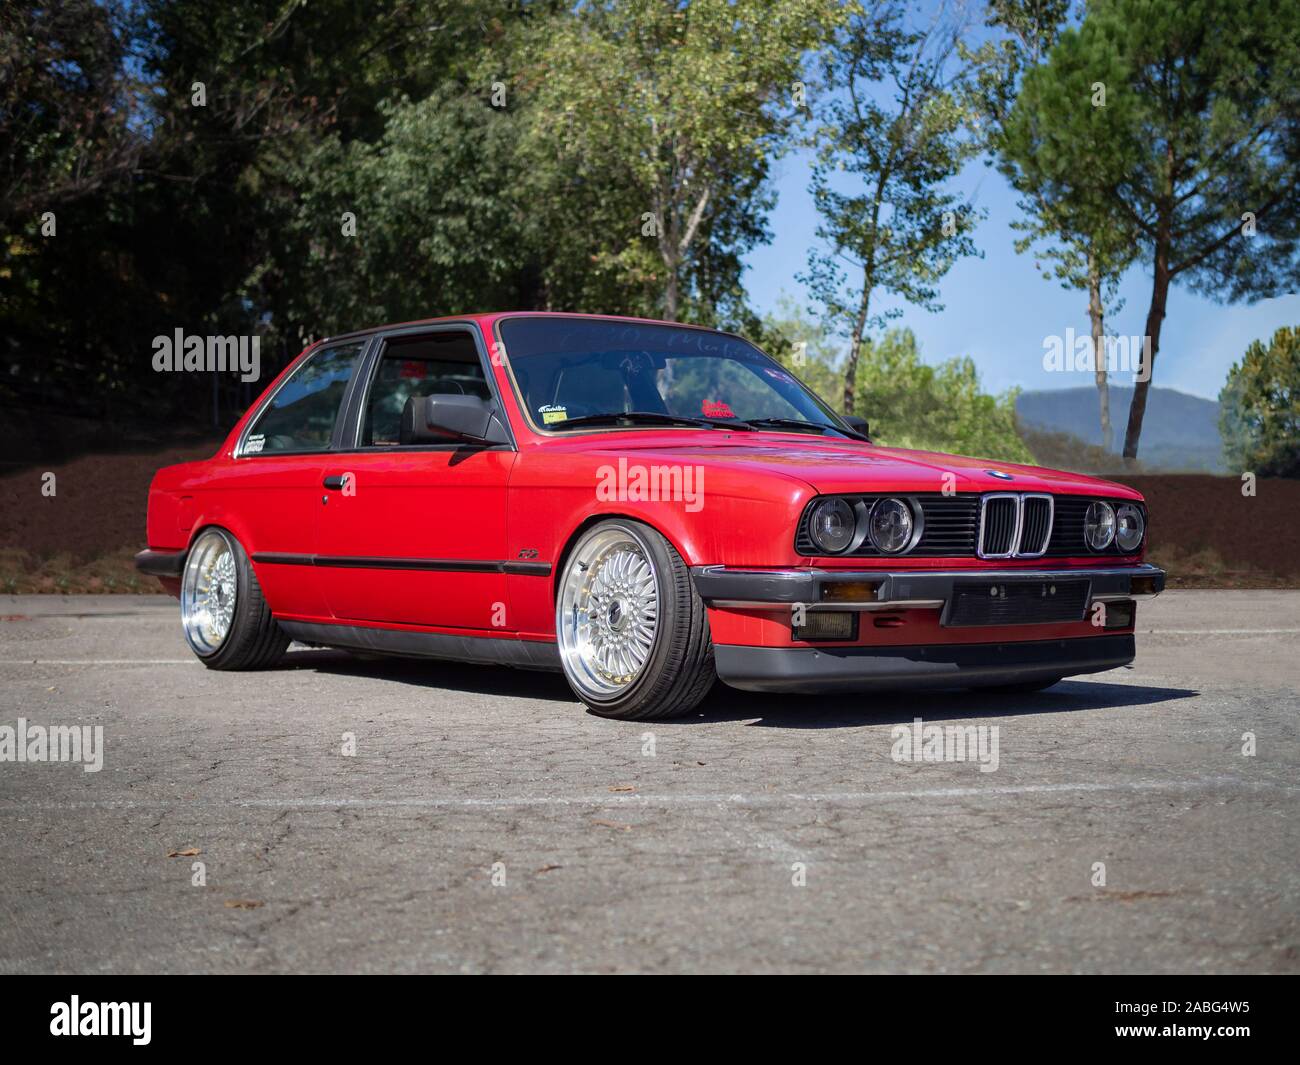 MONTMELO, SPAIN-SEPTEMBER 29, 2019: BMW 3 Series (E30) two-door sedan (Second generation of BMW 3 Series) Stock Photo